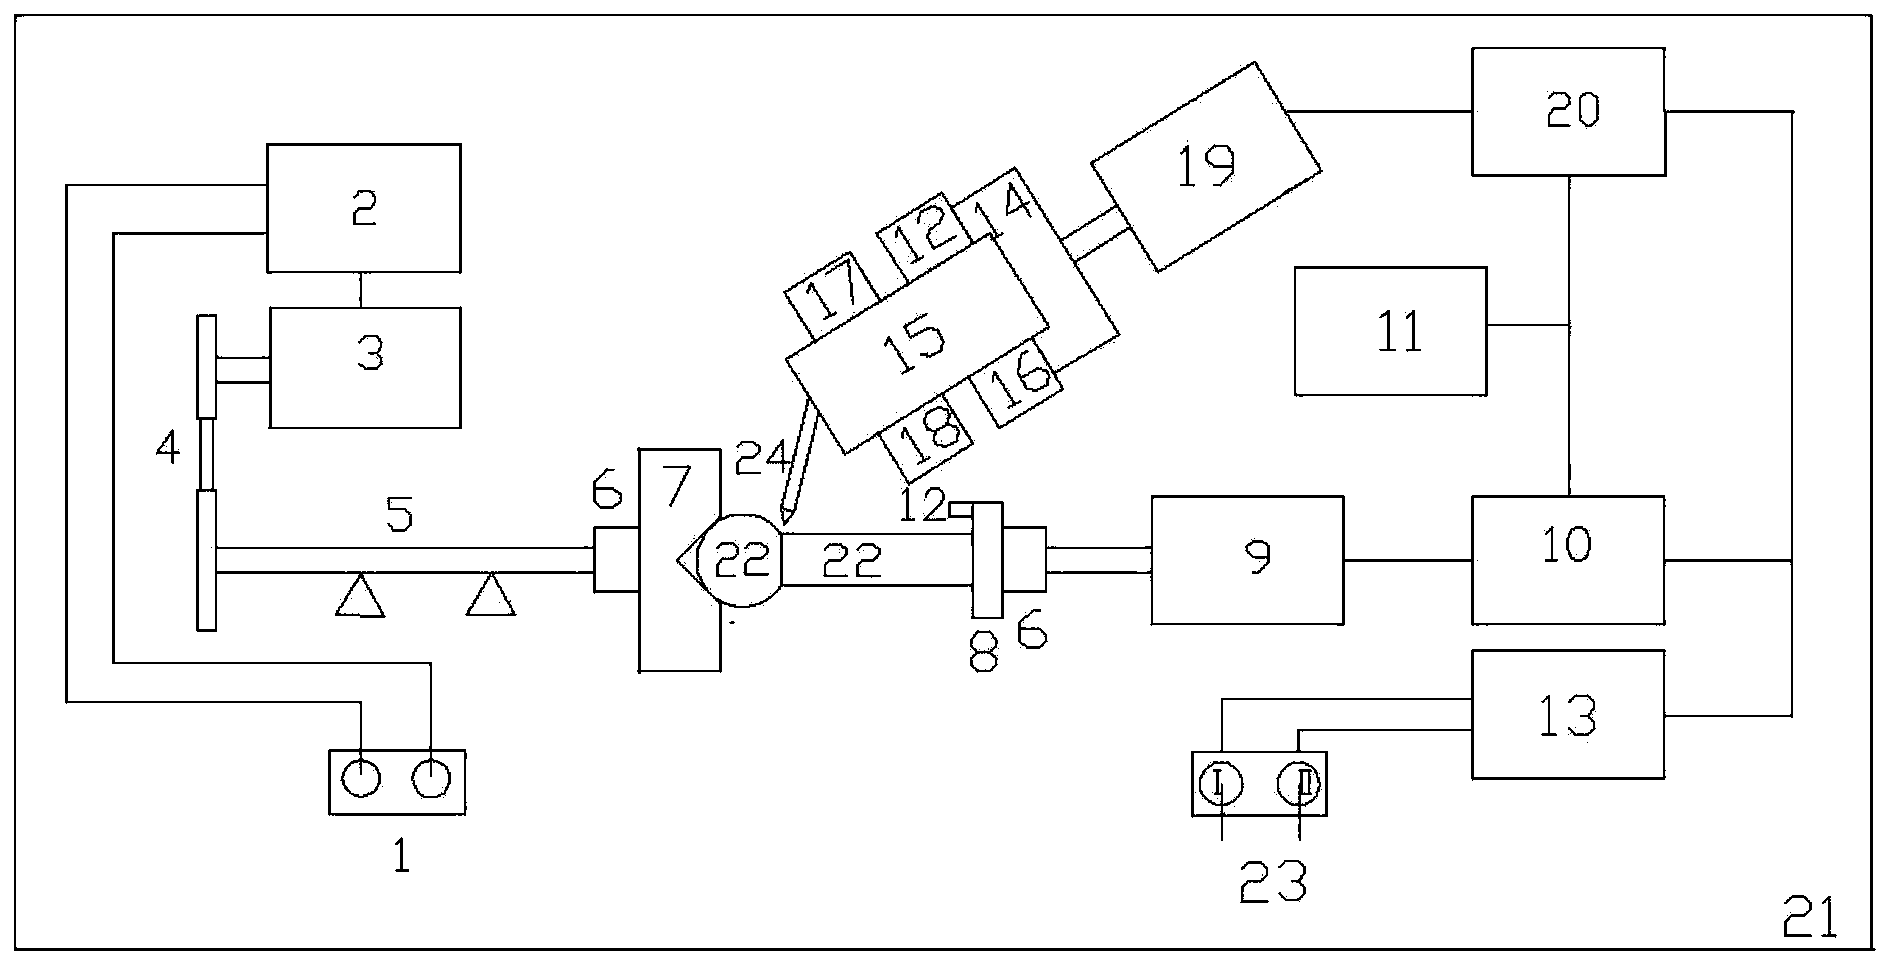 Semi-automatic welding device for circumferential welds